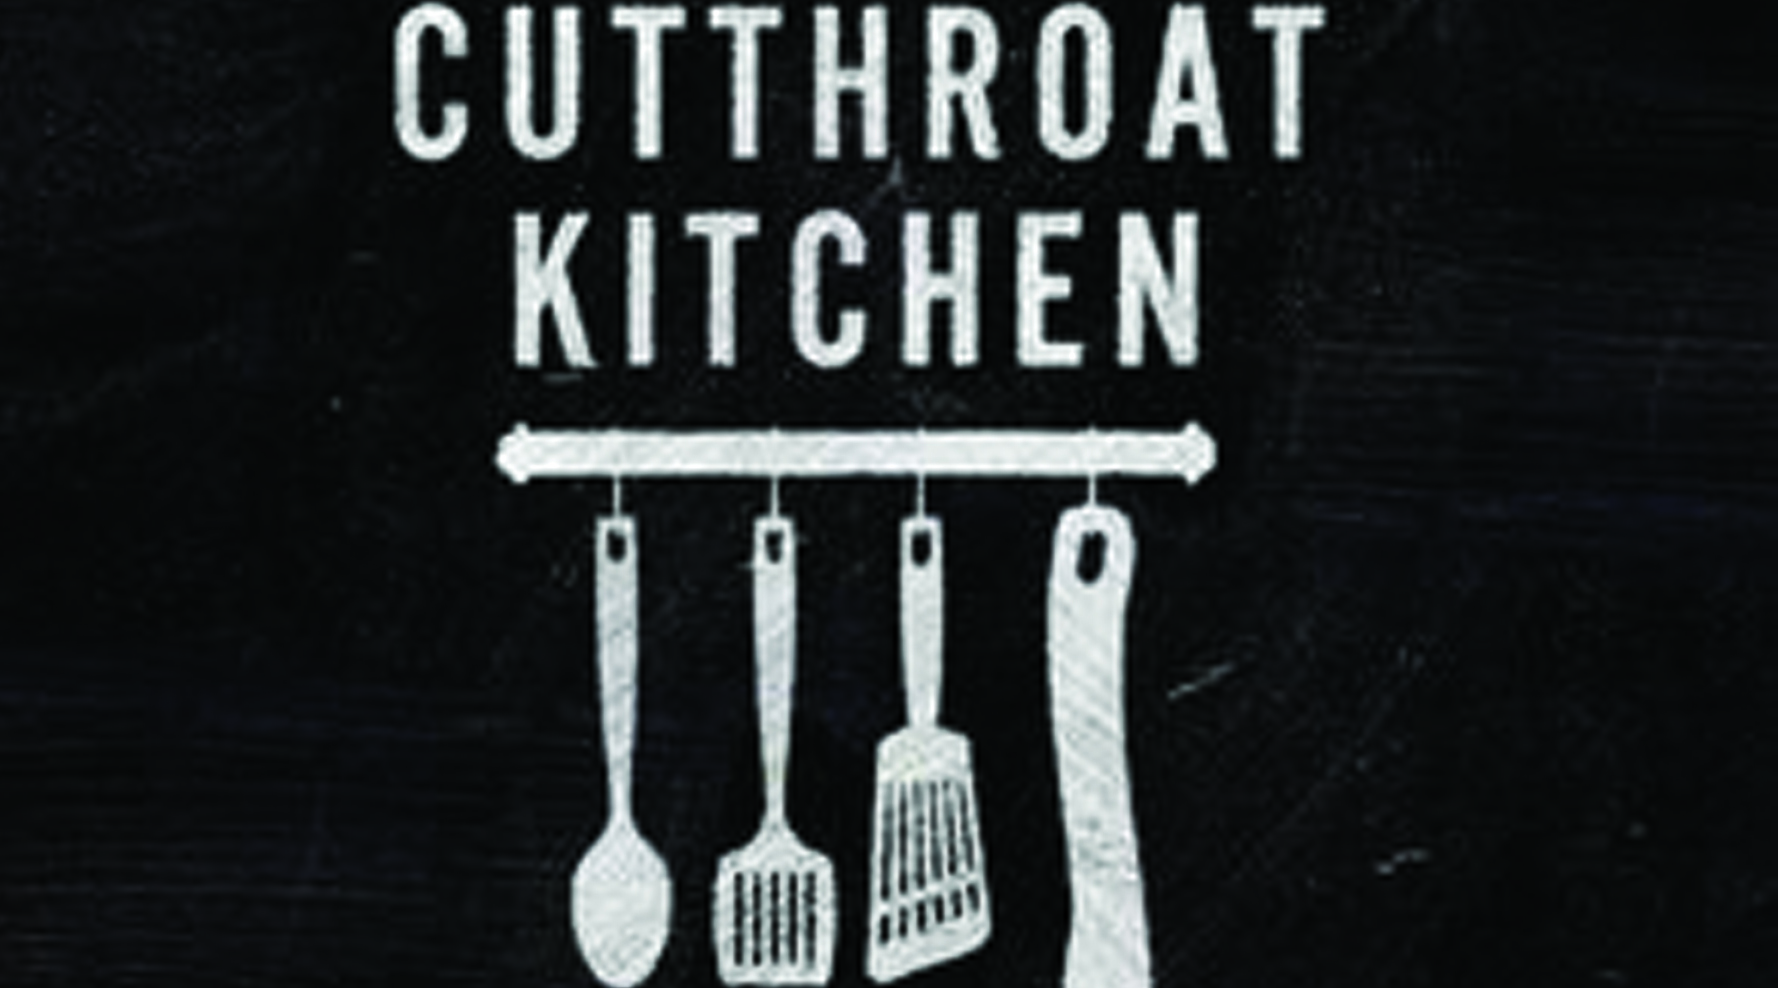 Local Military Chef To Compete On Food Networks Cutthroat Kitchen